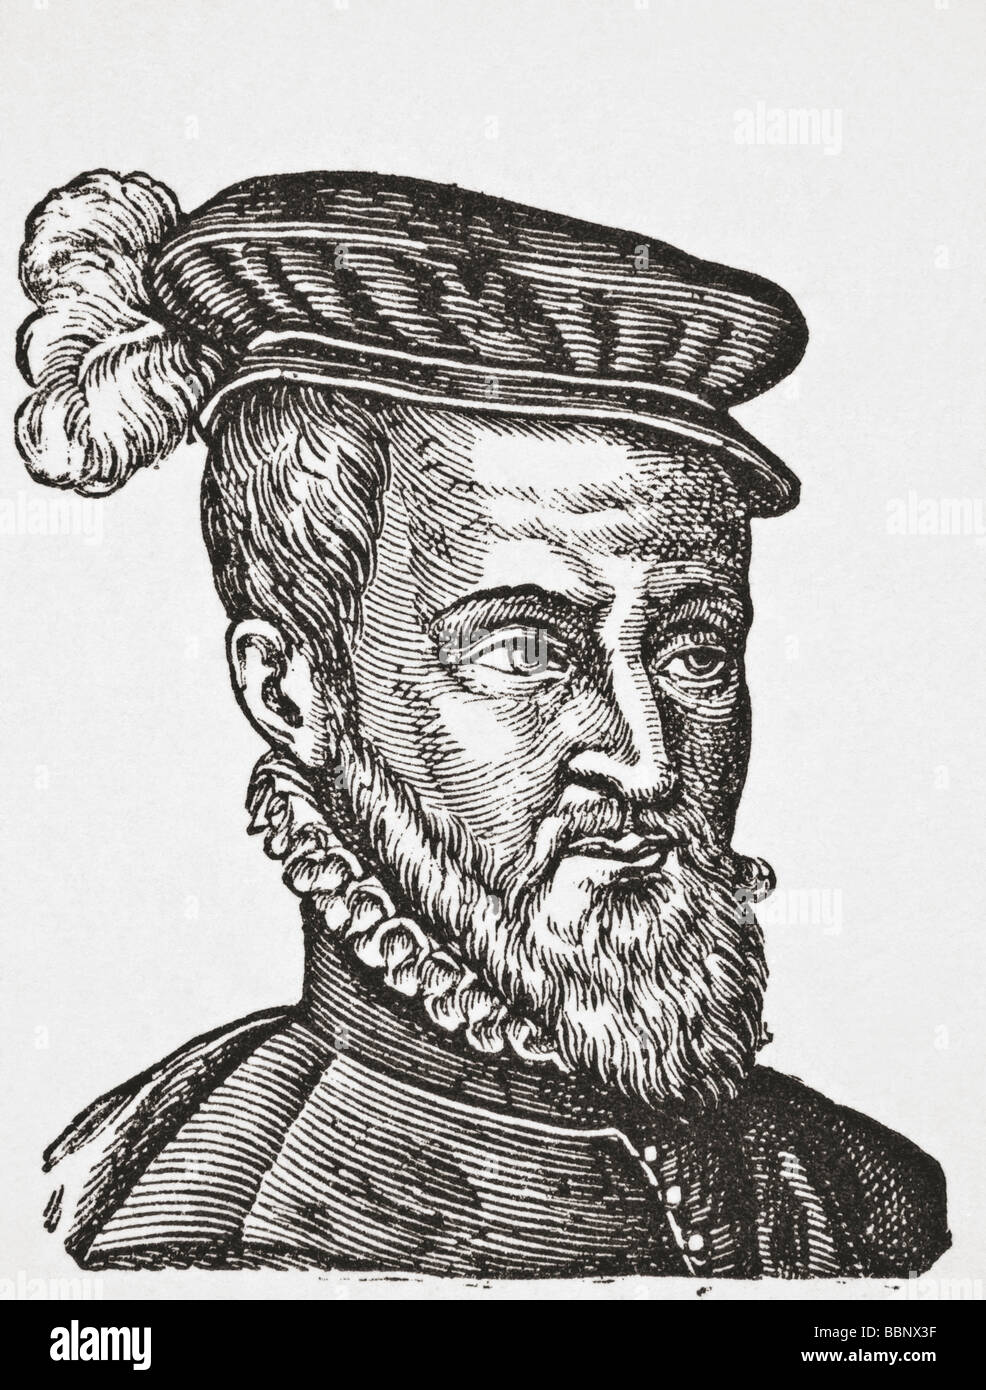 Joachim du Bellay, c.1525 - 1560.  French poet, critic and member of the Pléiade. Stock Photo